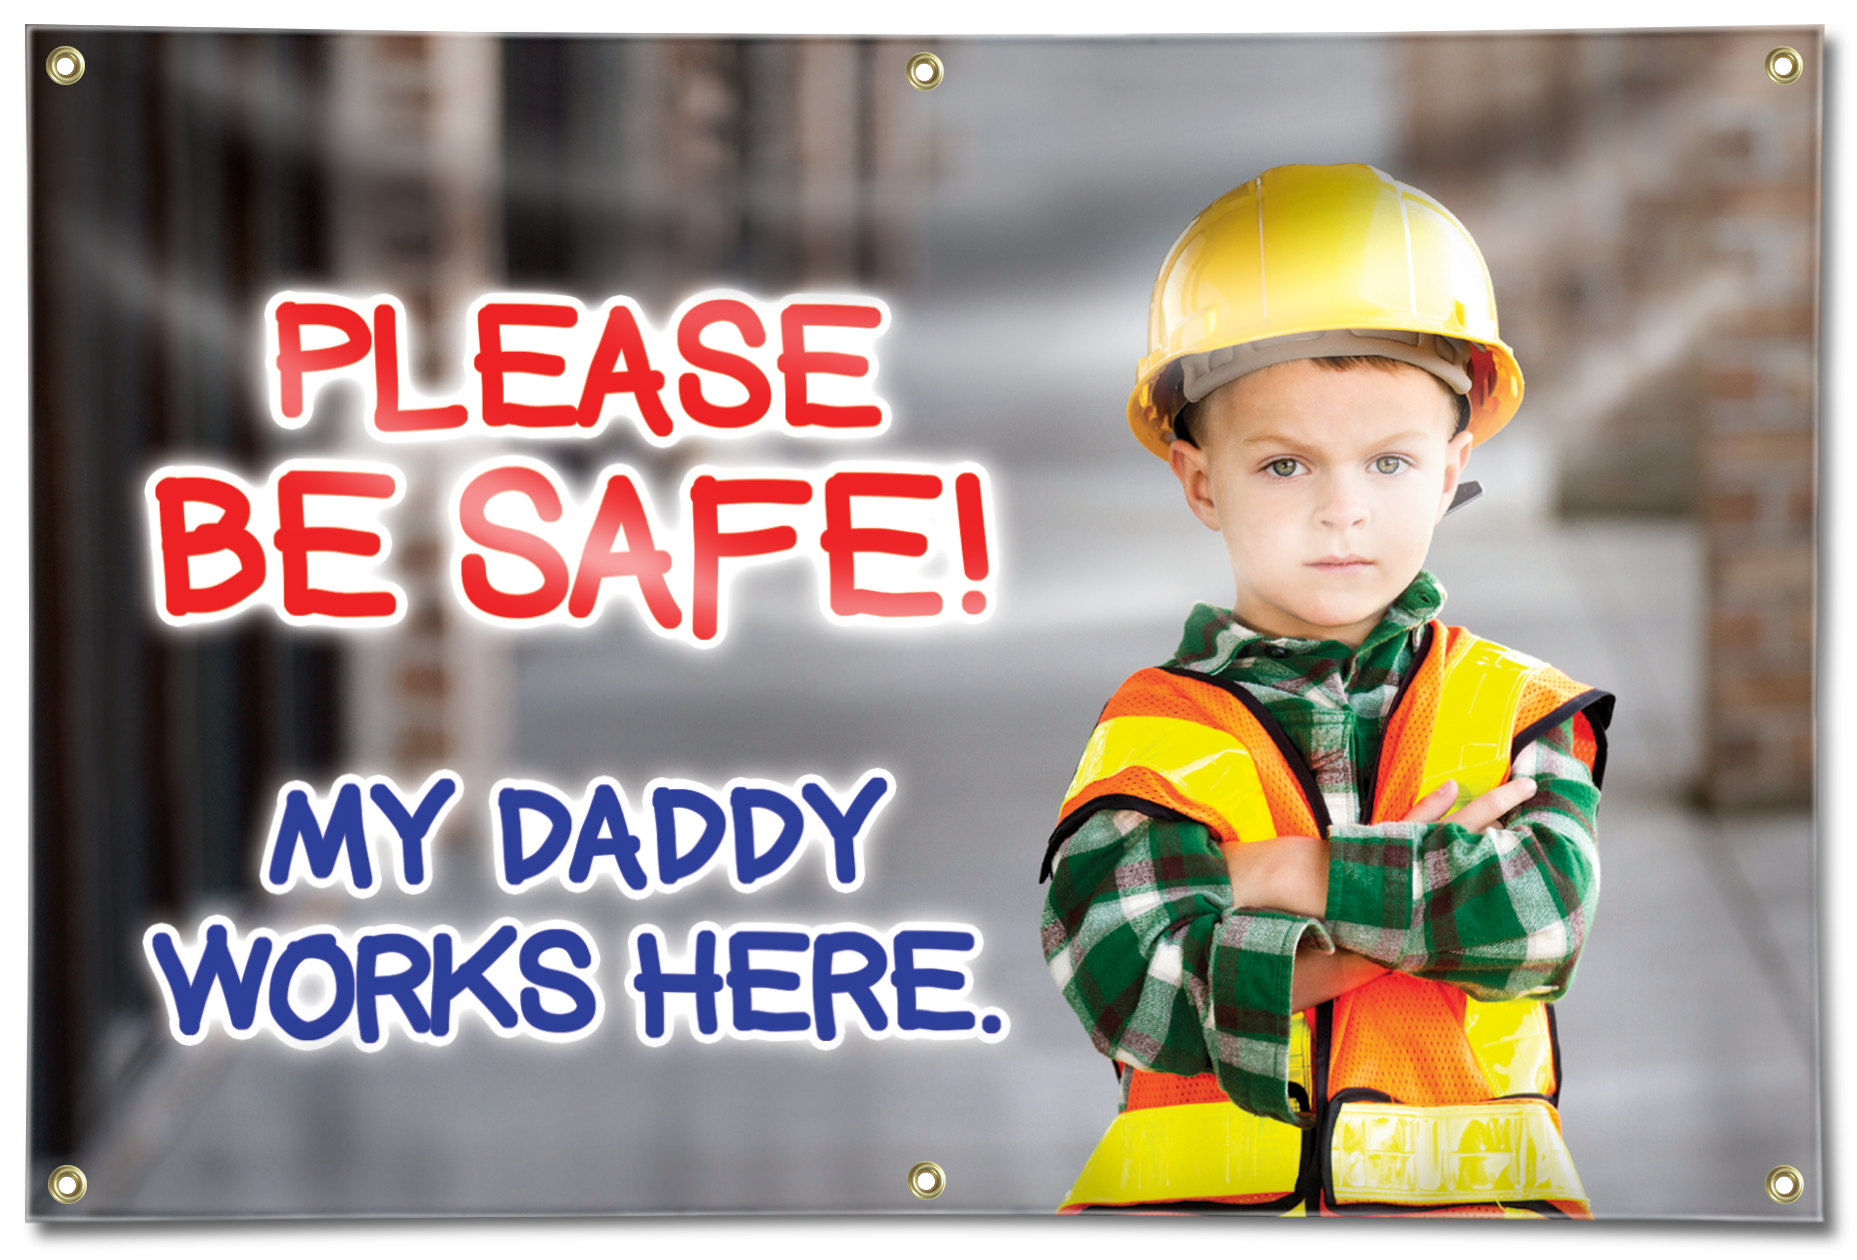 Daddy works here BANNER.png